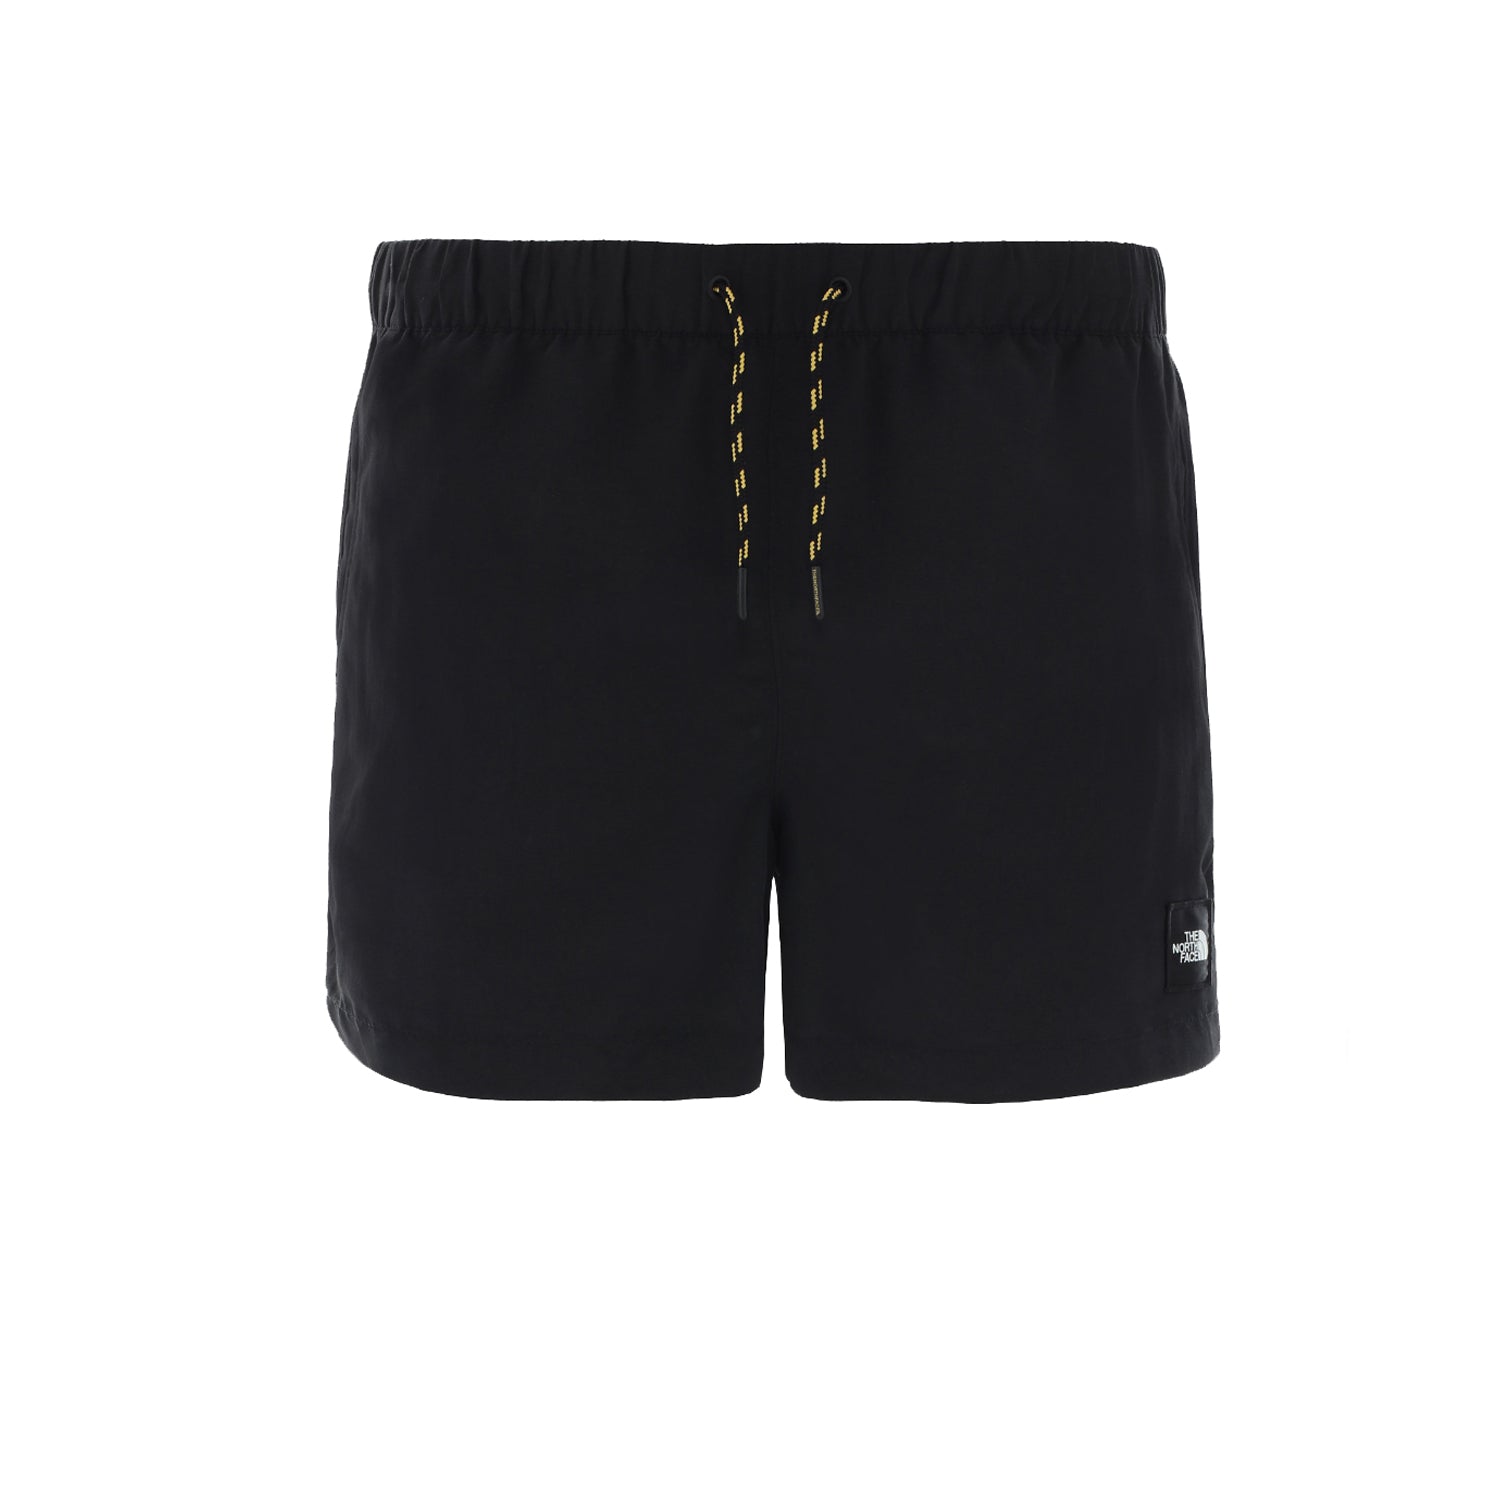 The North Face Mos Short Black